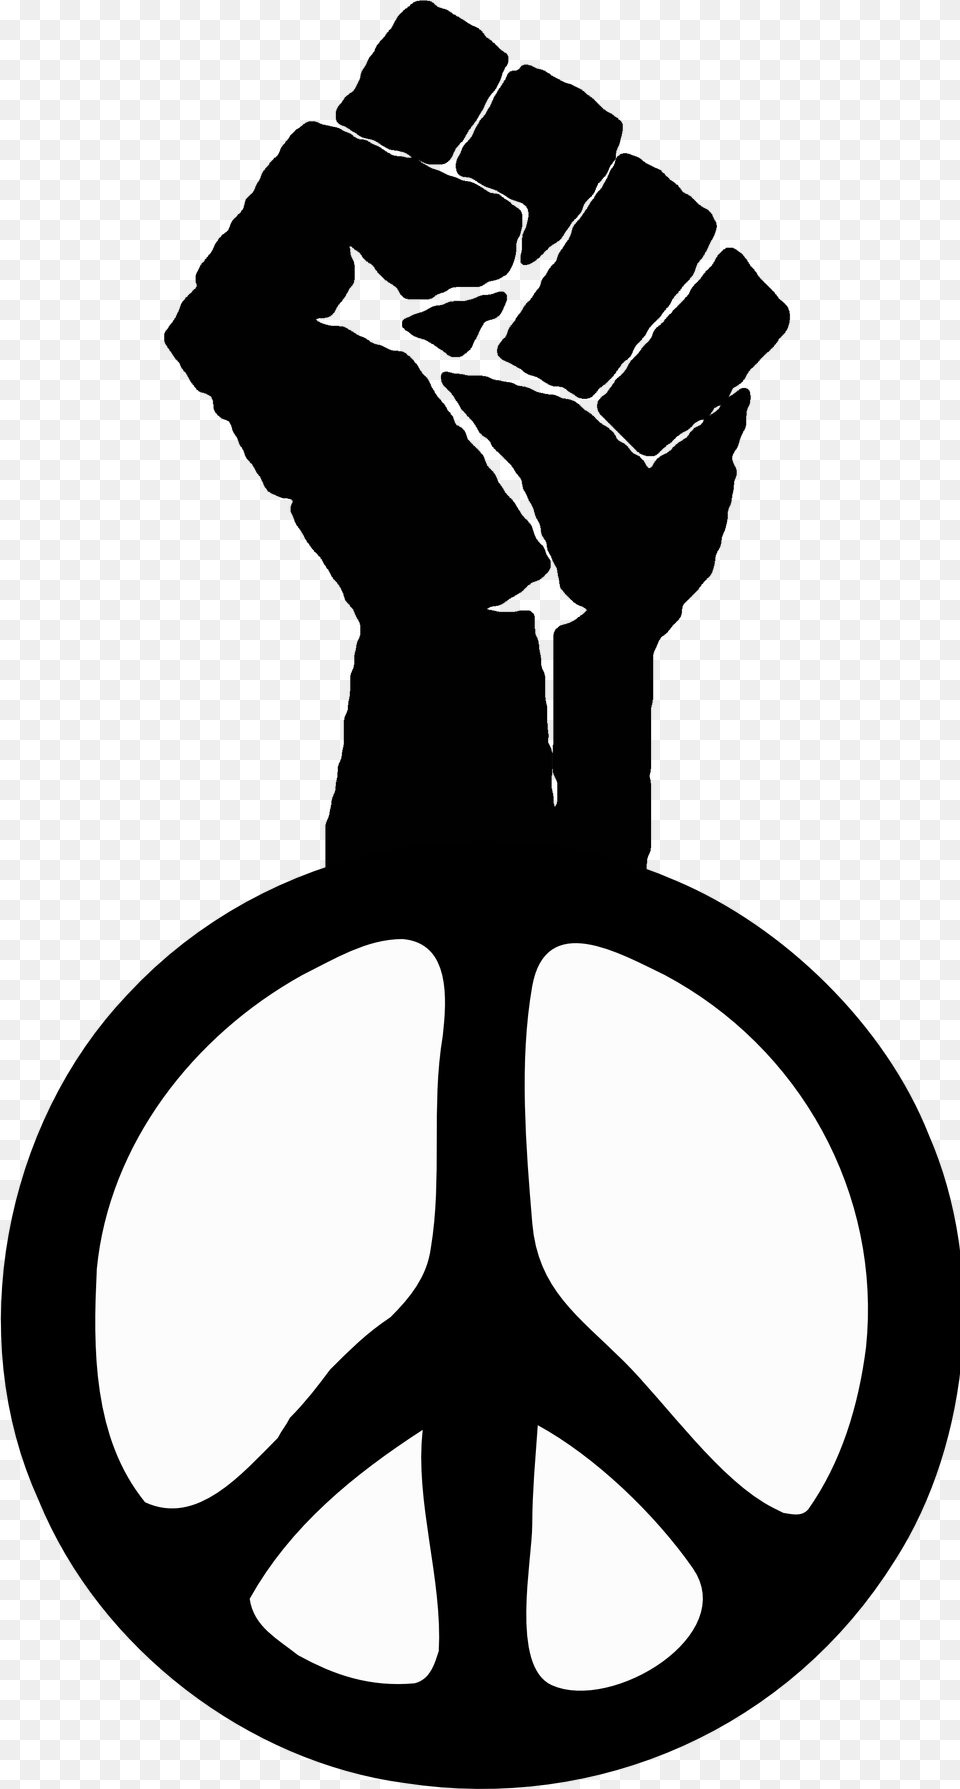 Black Power Fist Clipart Symbol Of Power And Peace, Stencil, Silhouette Free Transparent Png